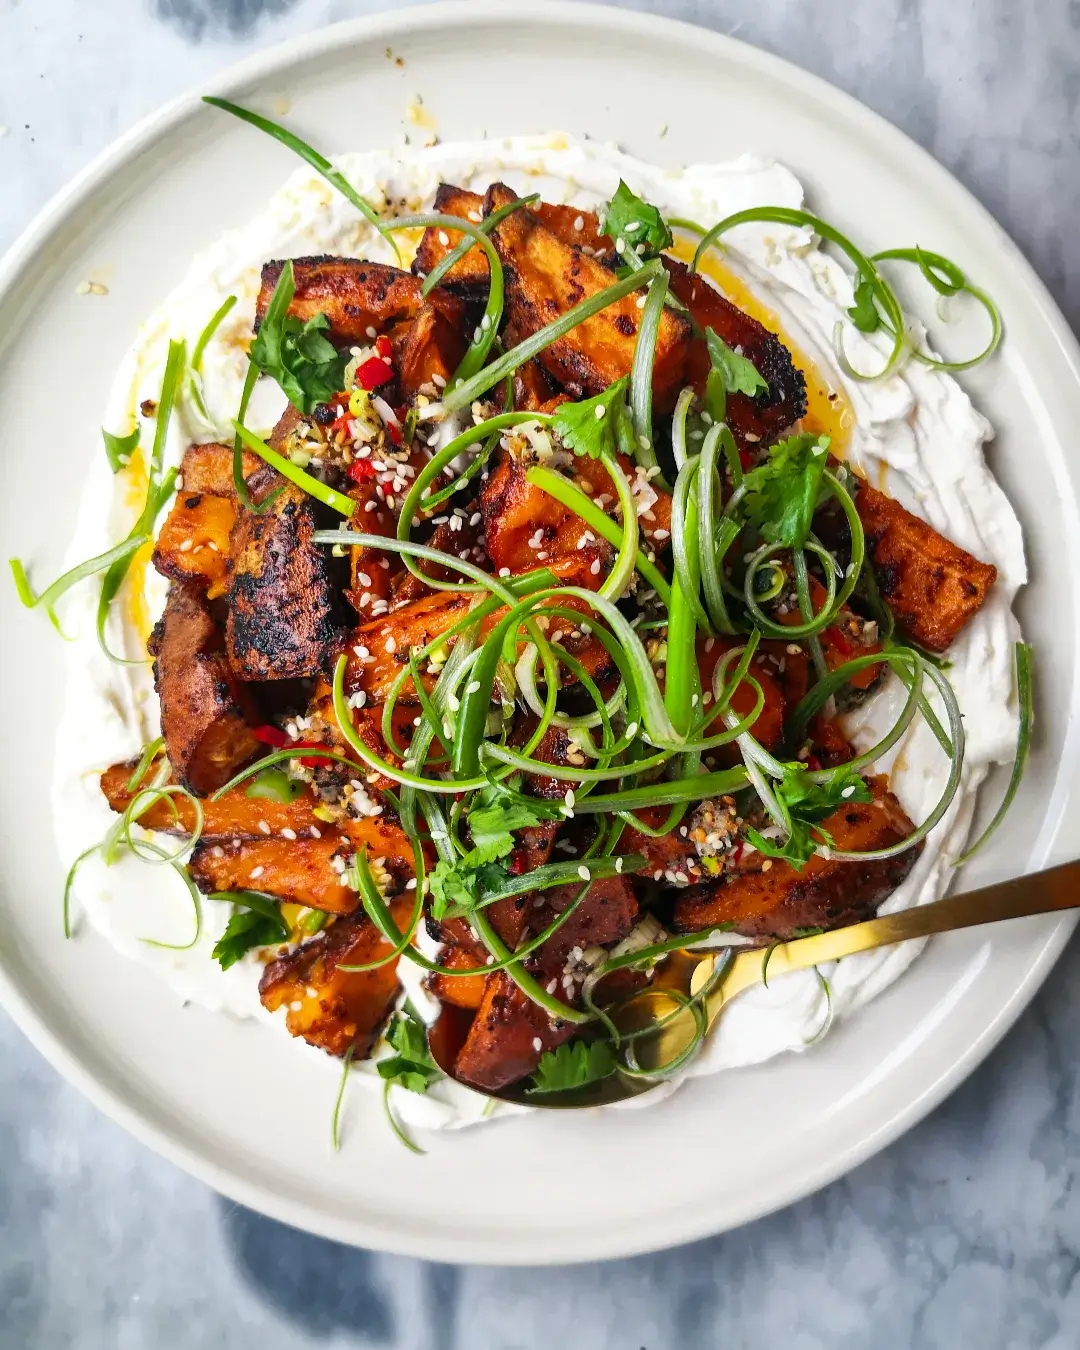 Miso roasted sweet potatoes on labneh, with spring onions and sesame seeds on top.